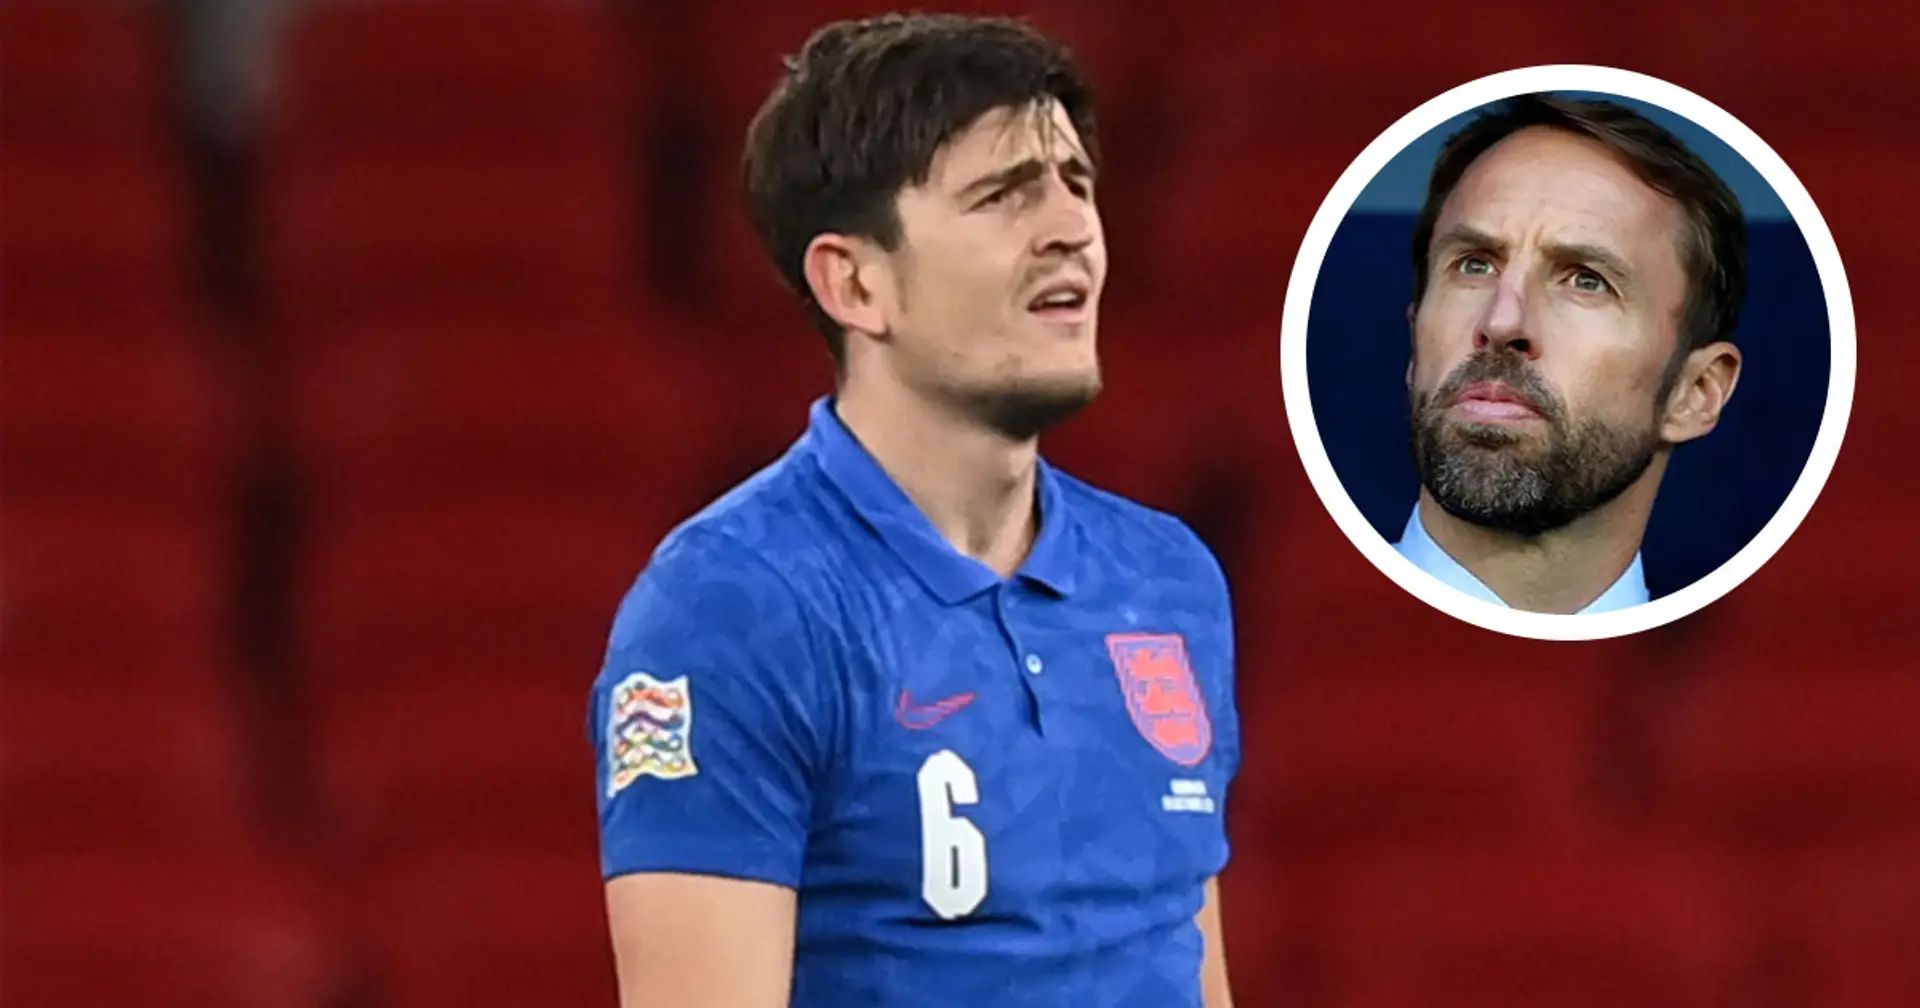 ‘He’ll come through, be a better player and a stronger man for it’: Gareth Southgate defends Maguire after sending-off against Denmark